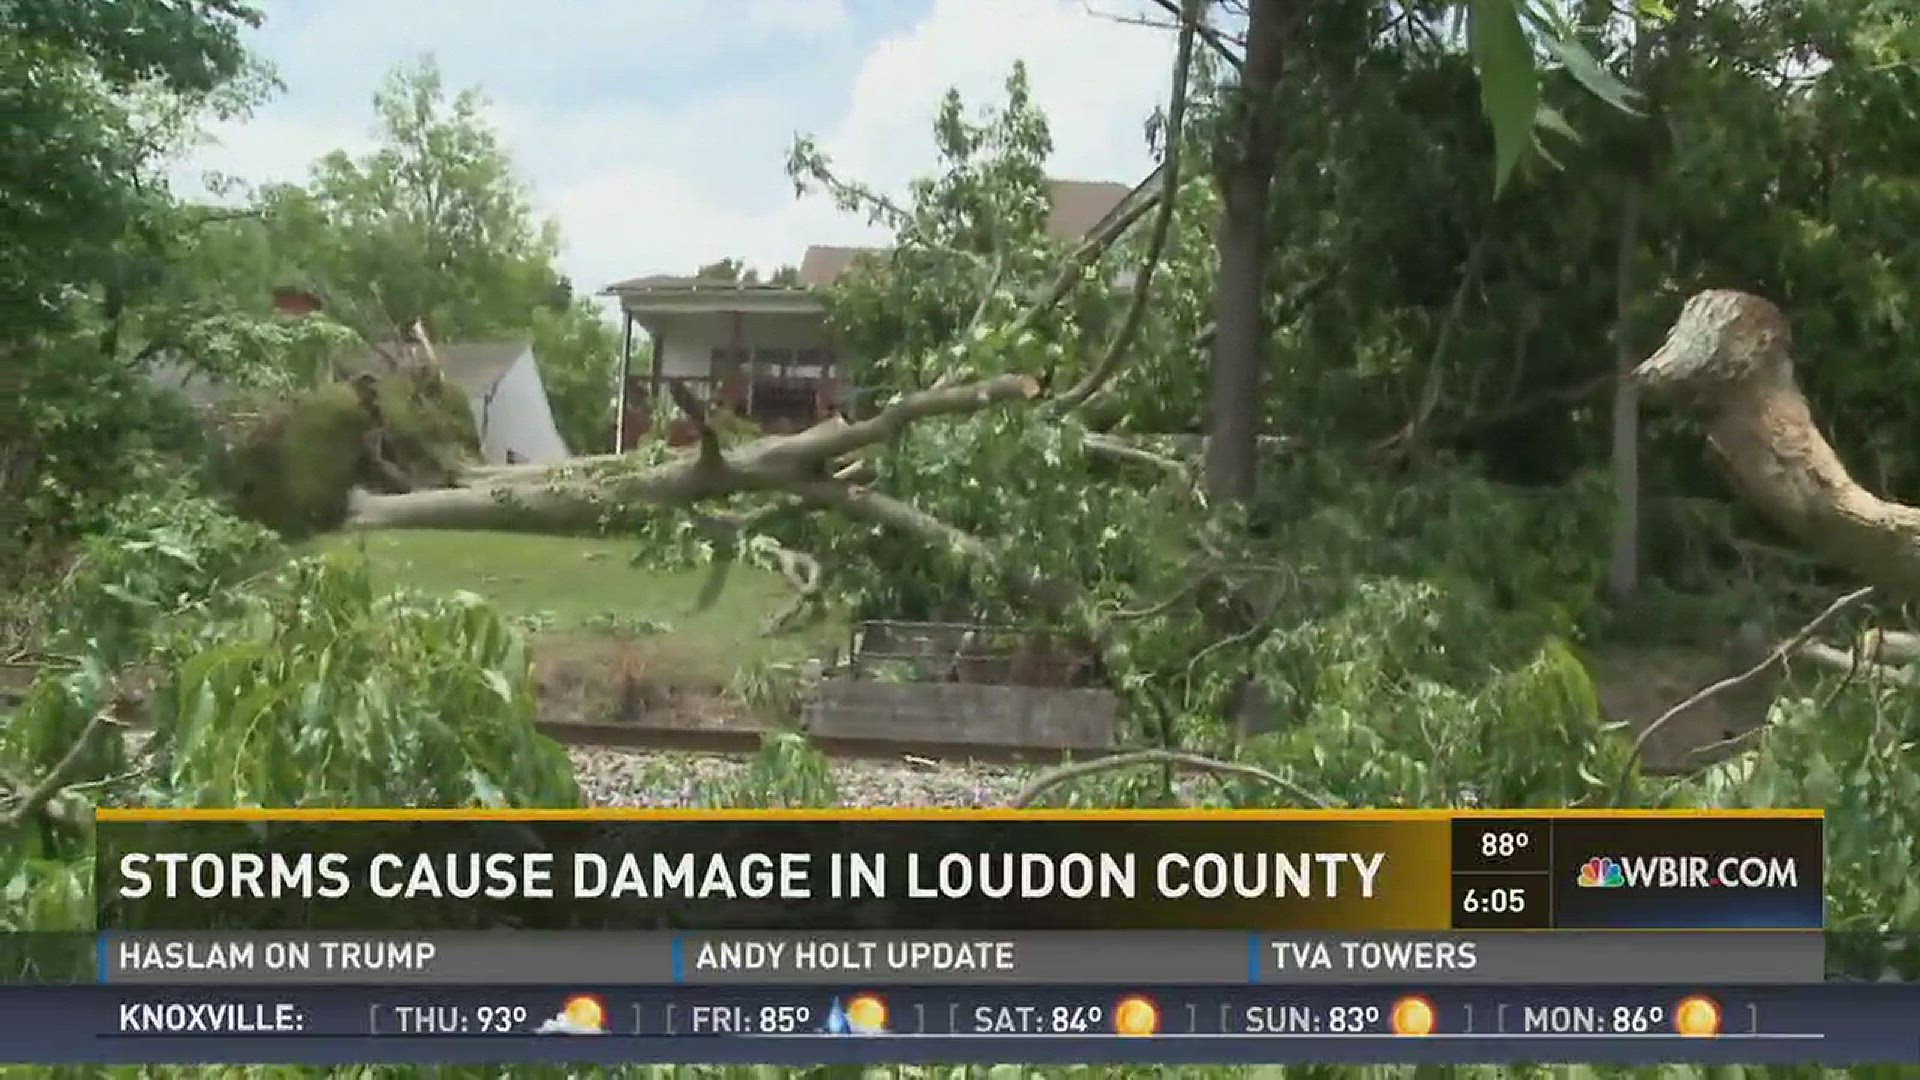 10Weather meteorologist Cassie Nall has more on a storm that knocked out power to much of Loudon County on Wednesday night. (6/15/16)